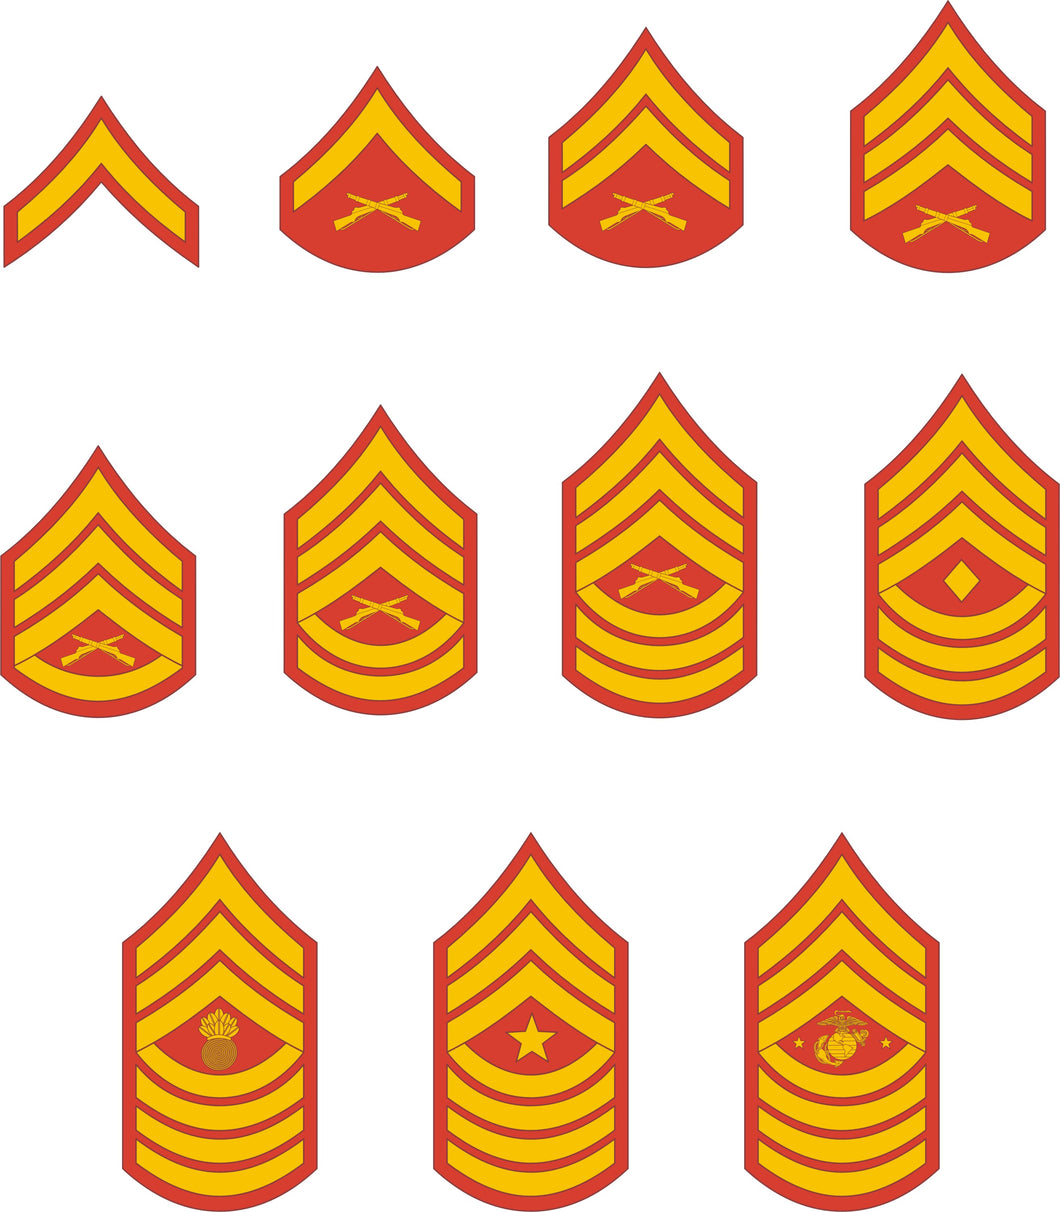 Marine Corps Enlisted Rank Insignia stickers